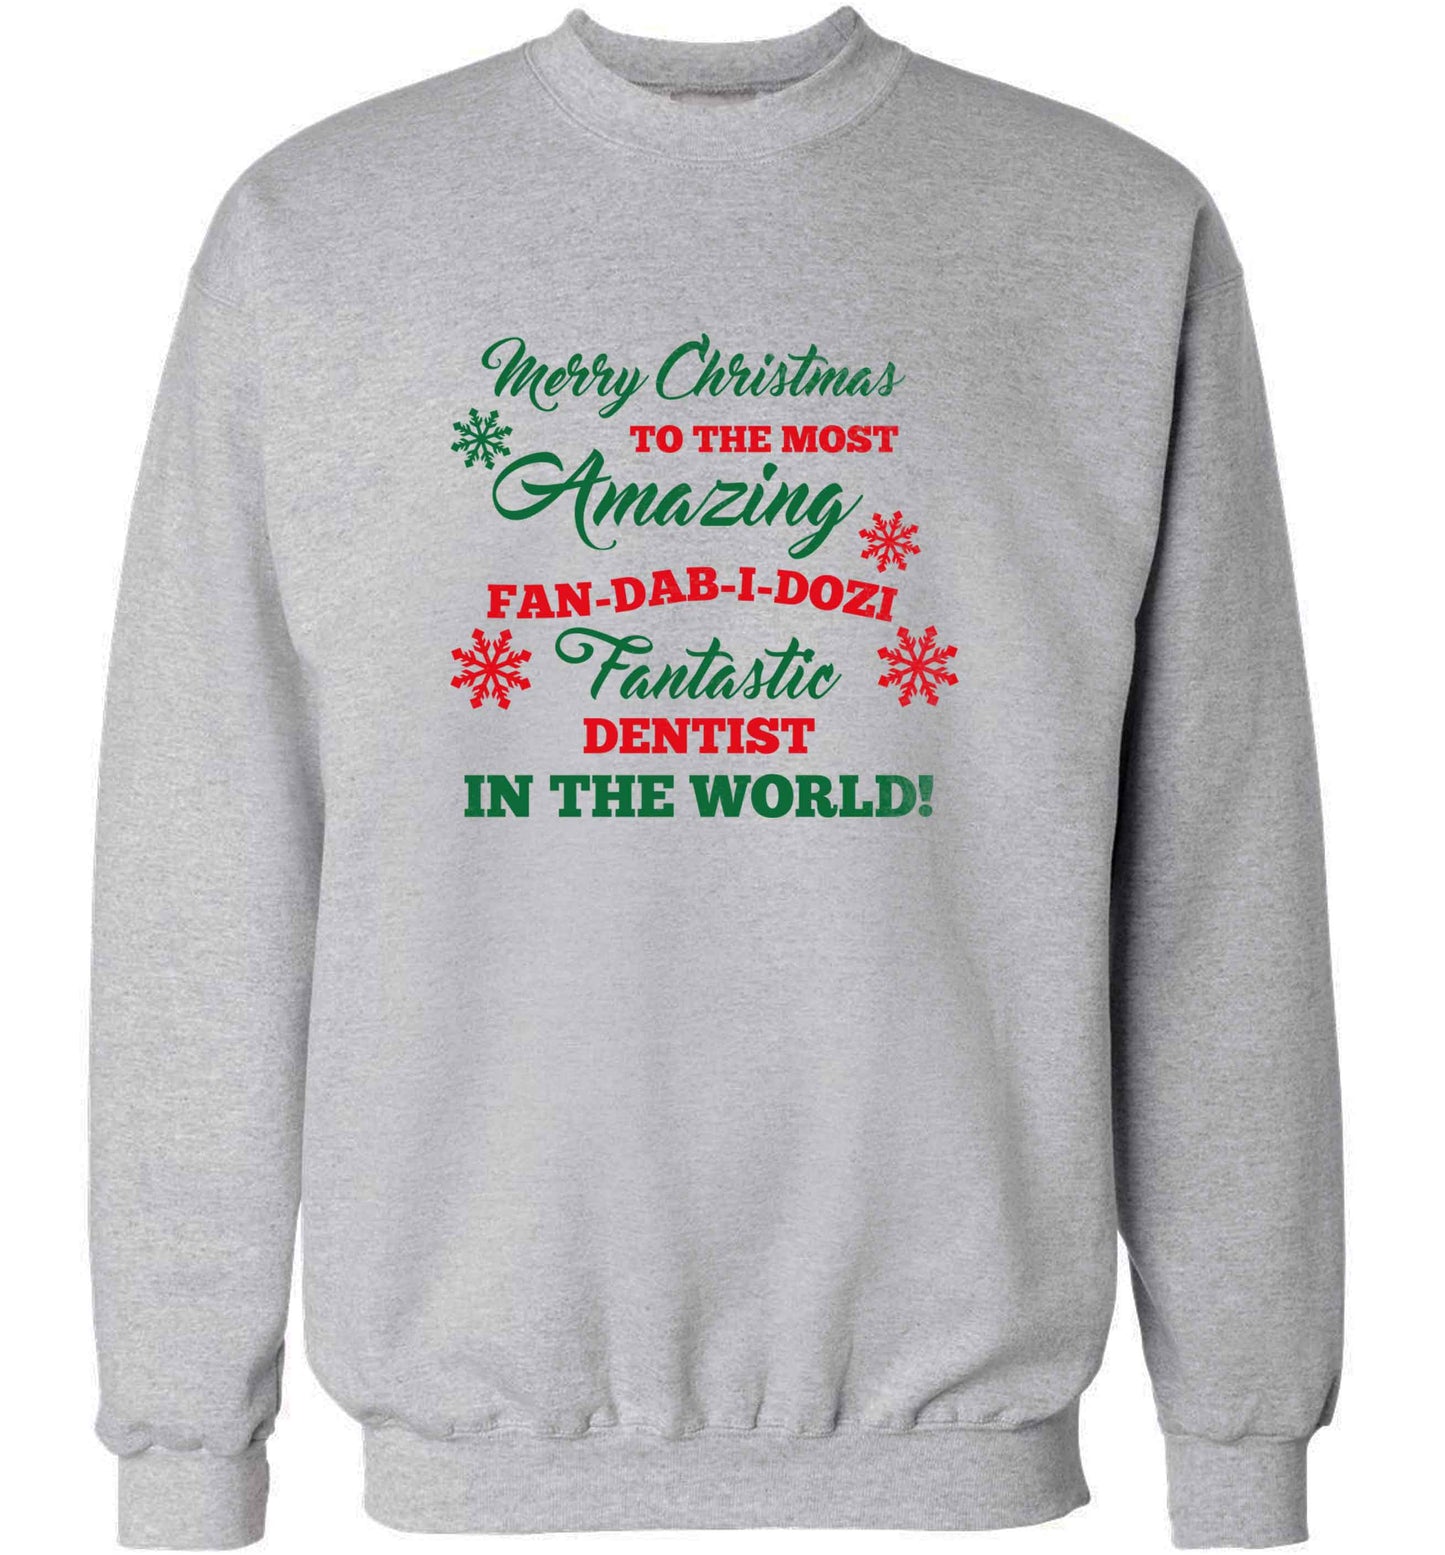 Merry Christmas to the most amazing dentist in the world! adult's unisex grey sweater 2XL